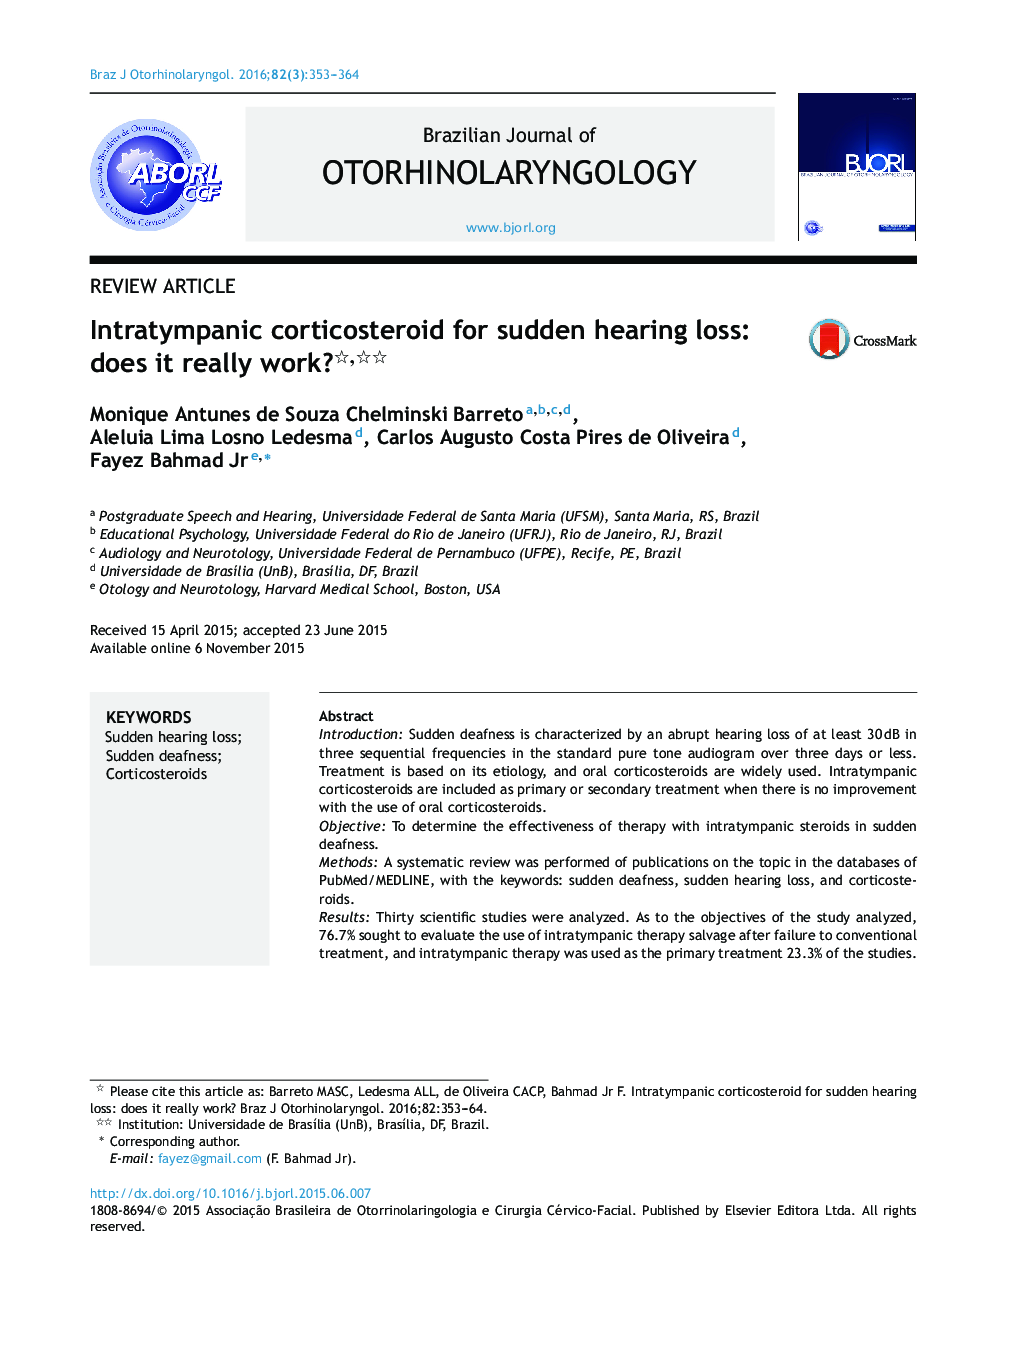 Intratympanic corticosteroid for sudden hearing loss: does it really work? 